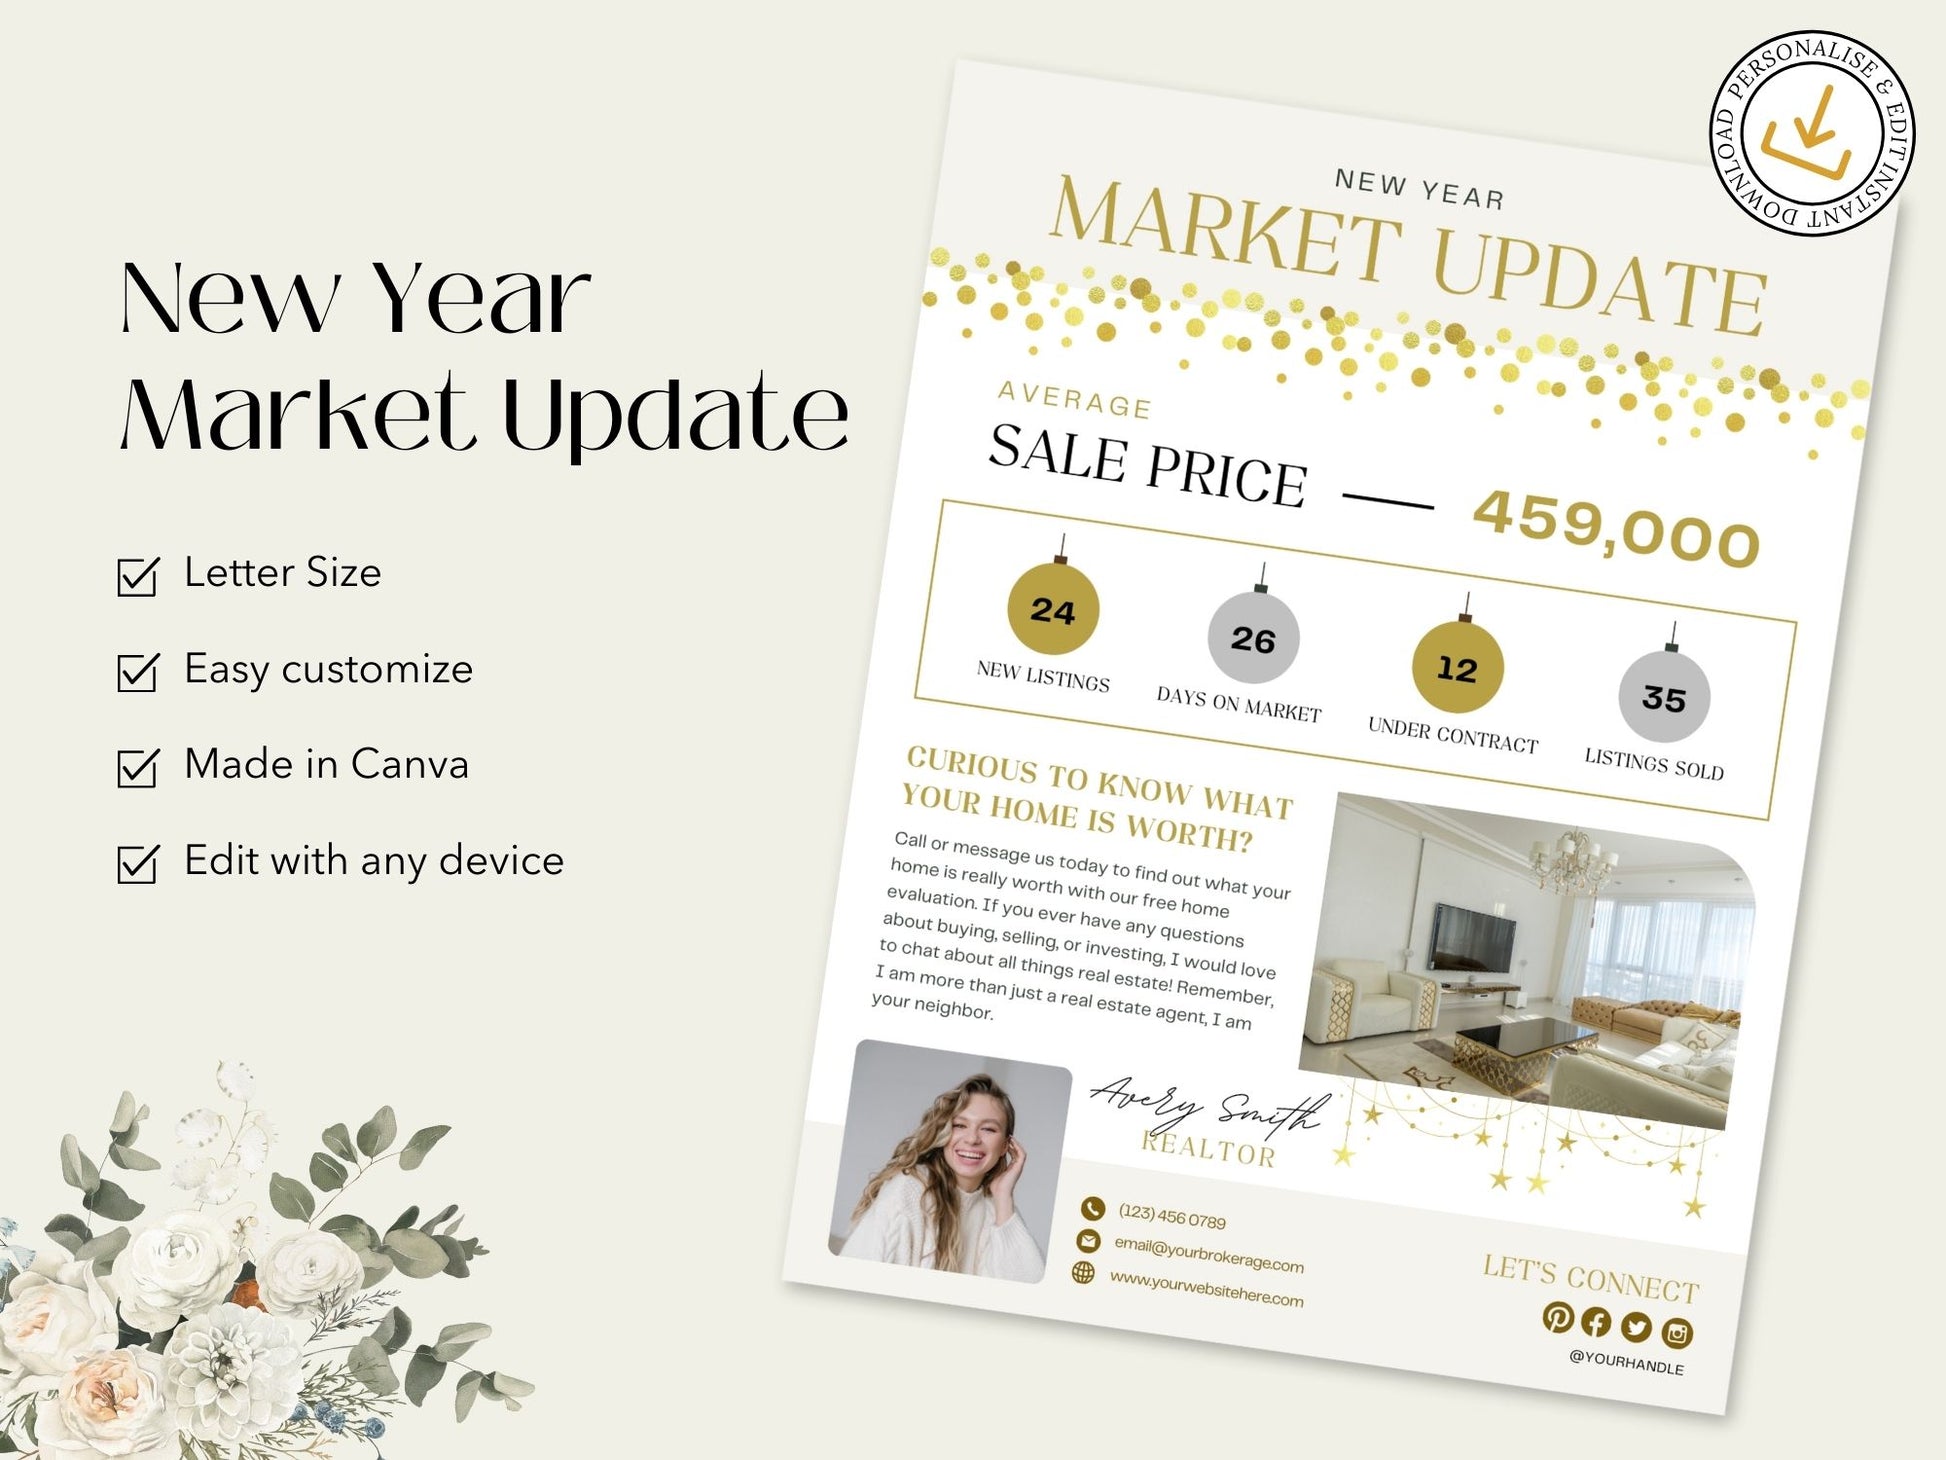 Real Estate New Year Market Update Flyer: Providing Insights into 2024 Real Estate Trends to Clients and the Community